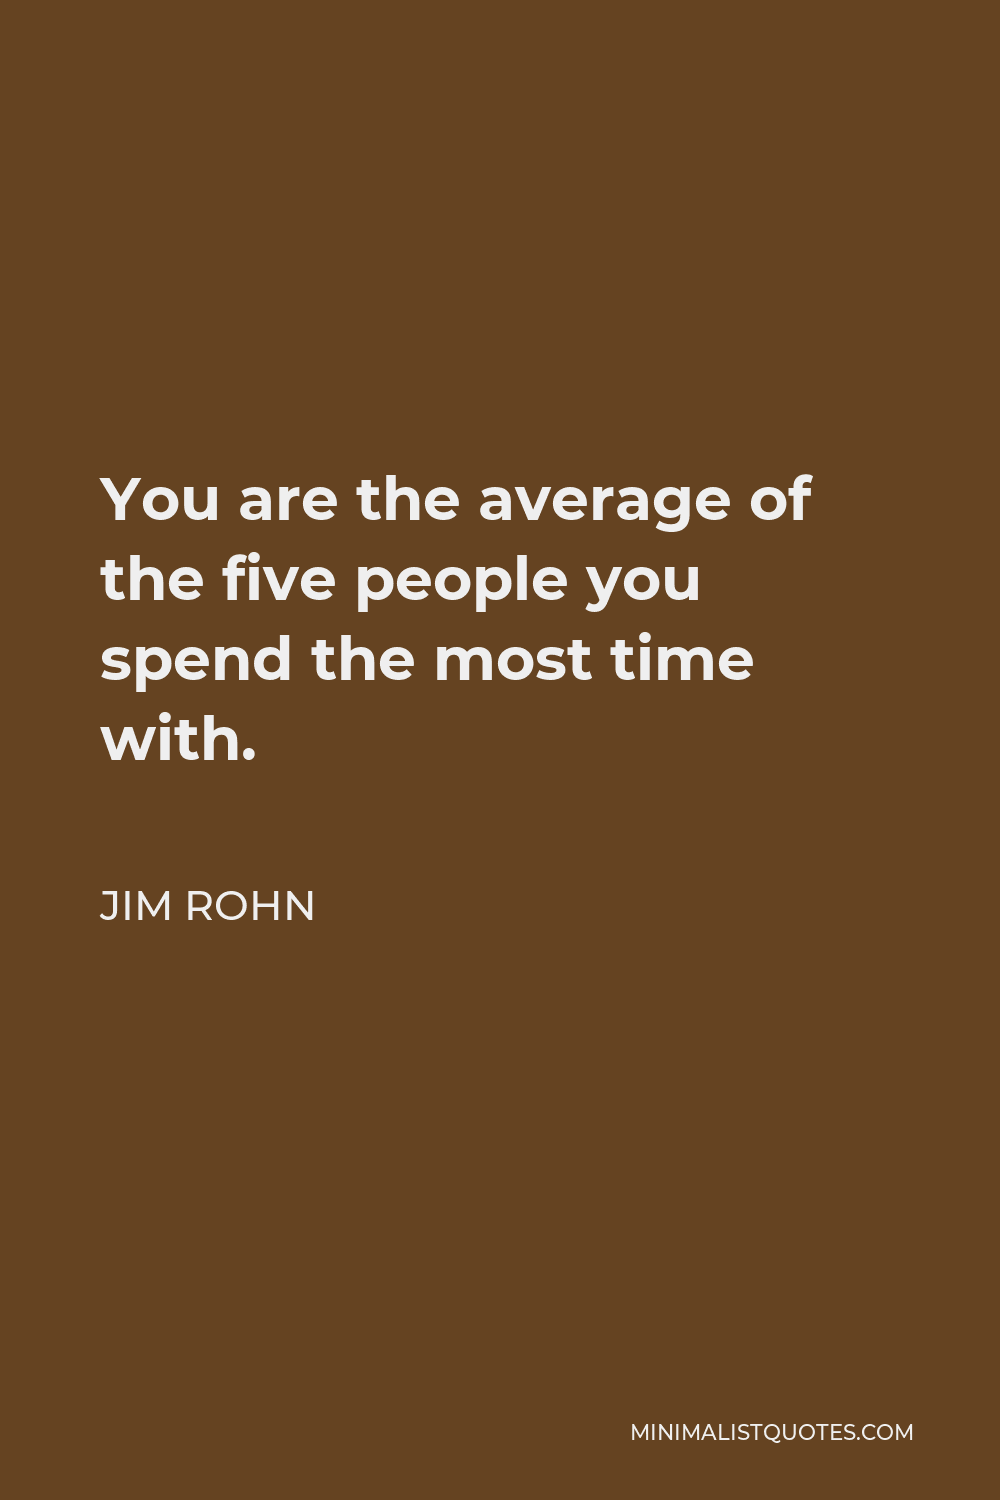 Jim Rohn Quote - You are the average of the five people you spend the most time with.